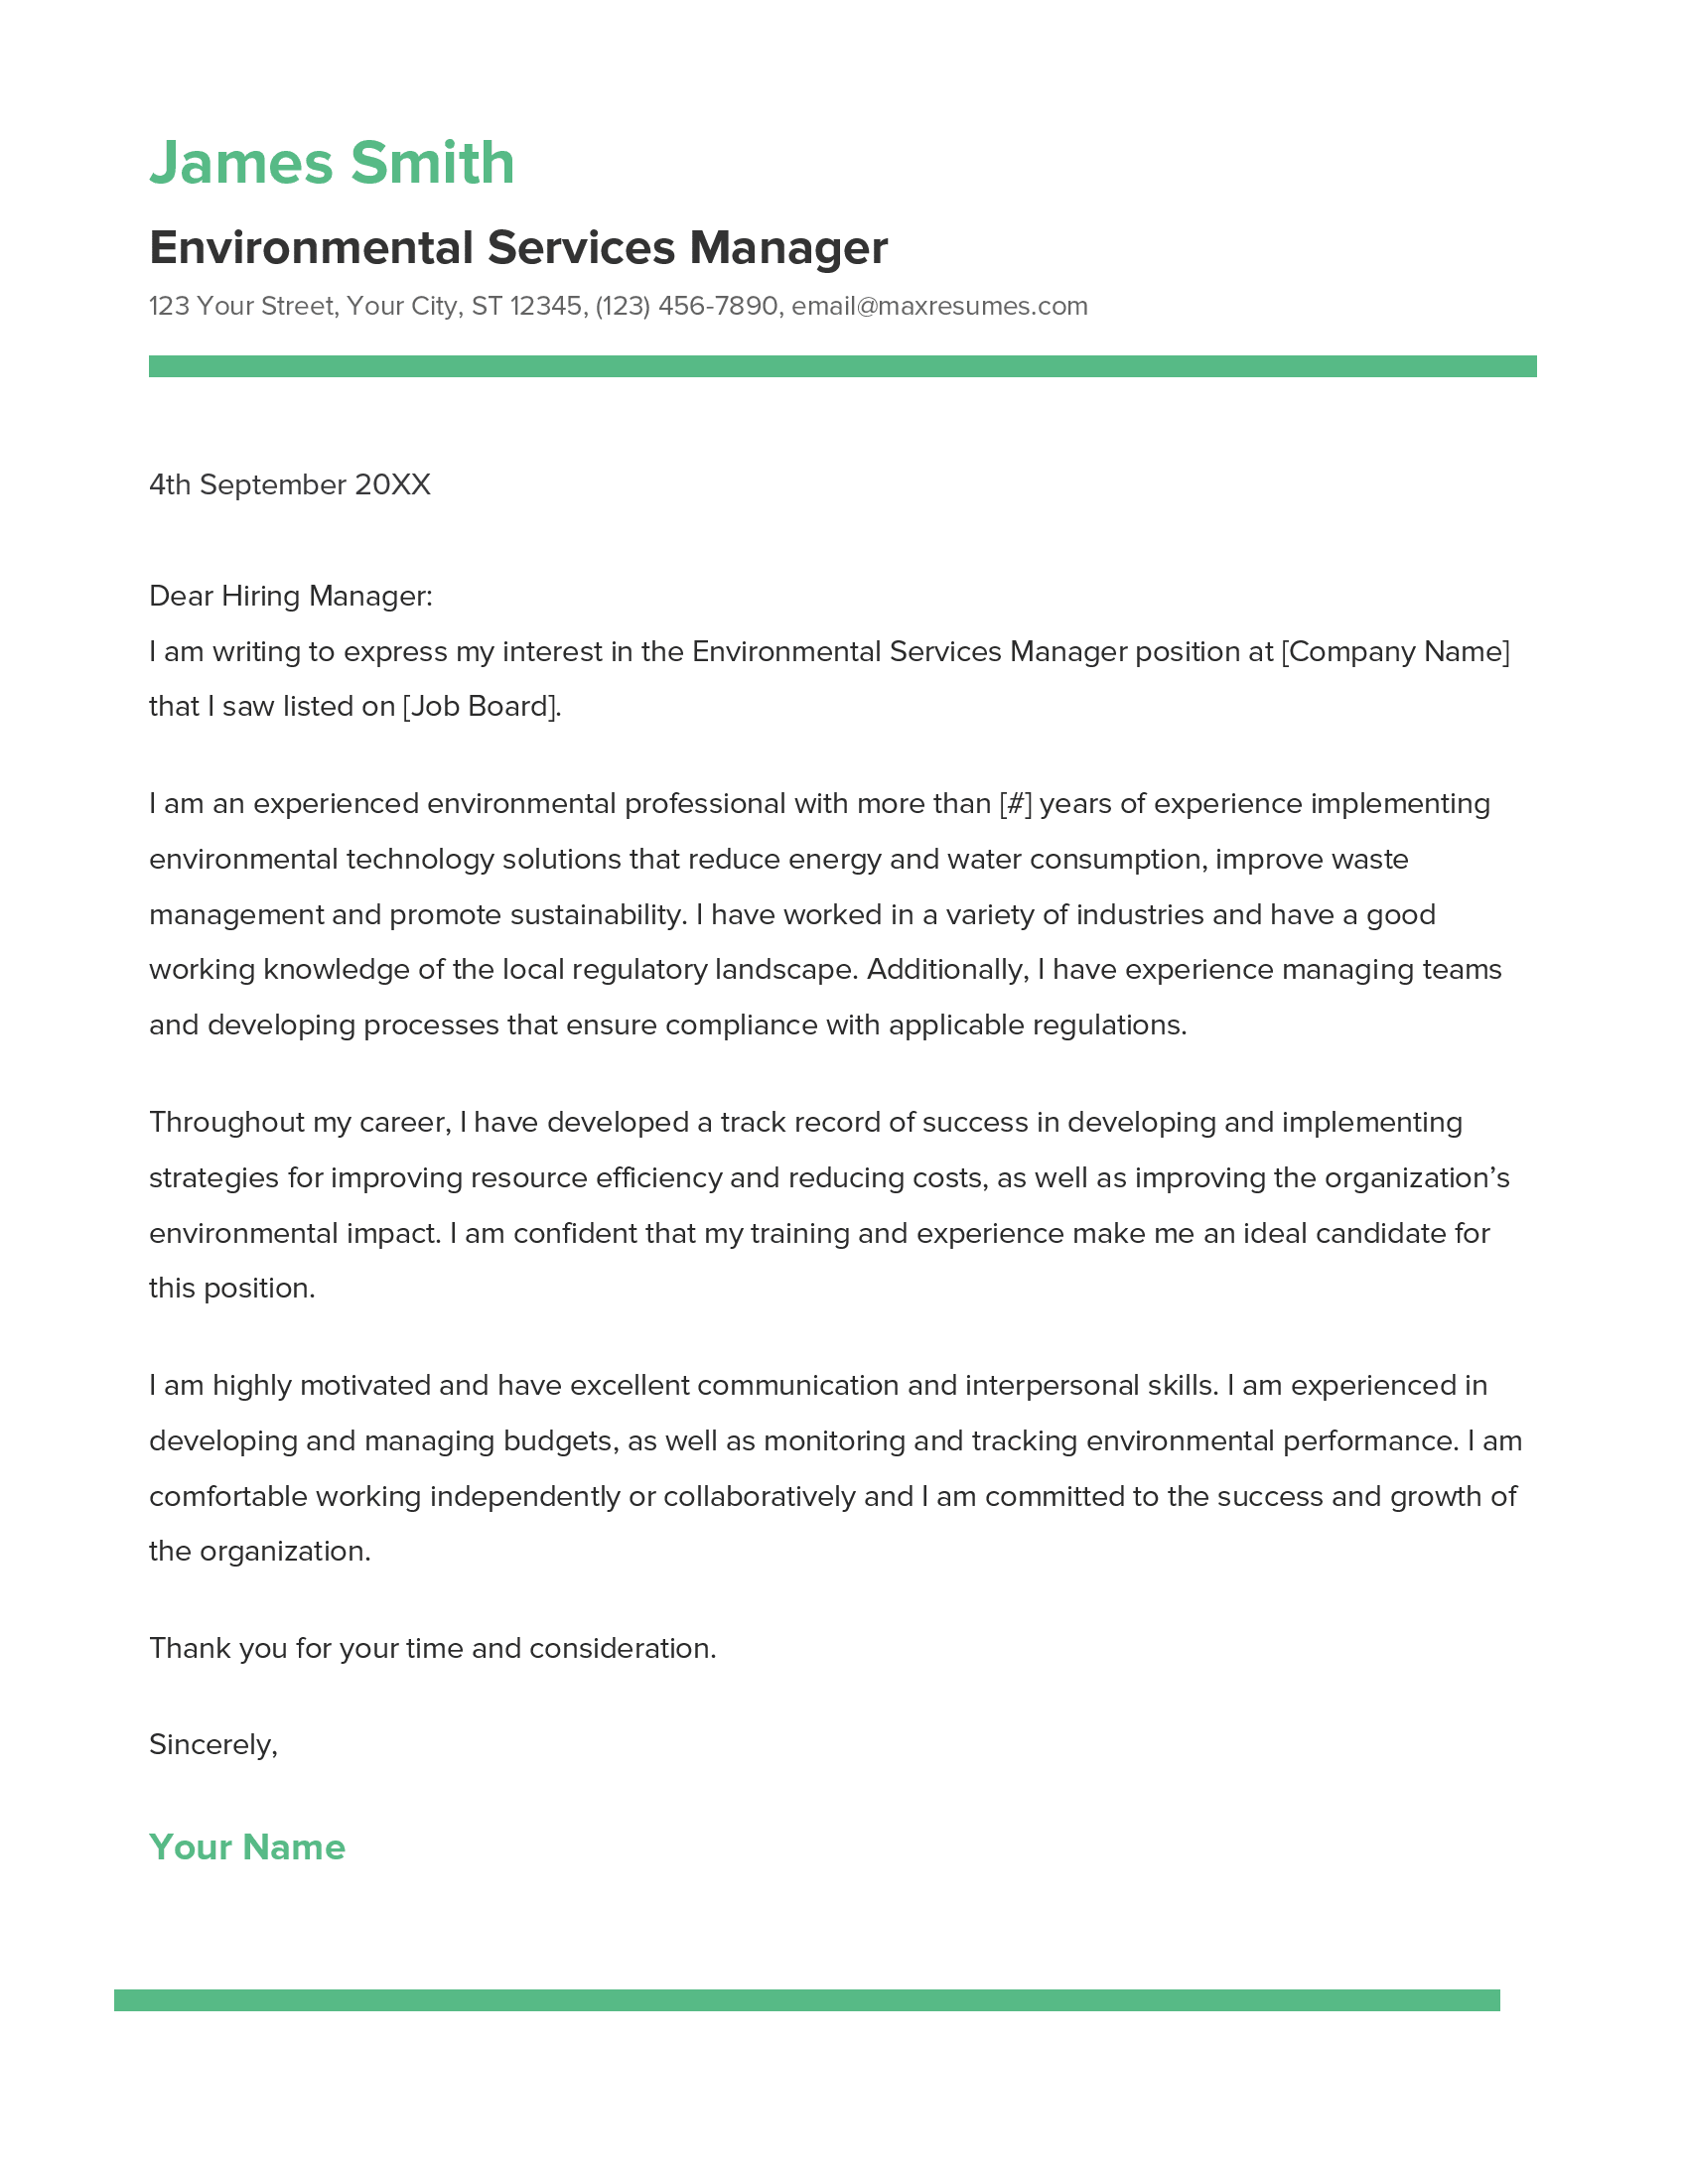 Environmental Services Manager Cover Letter Example